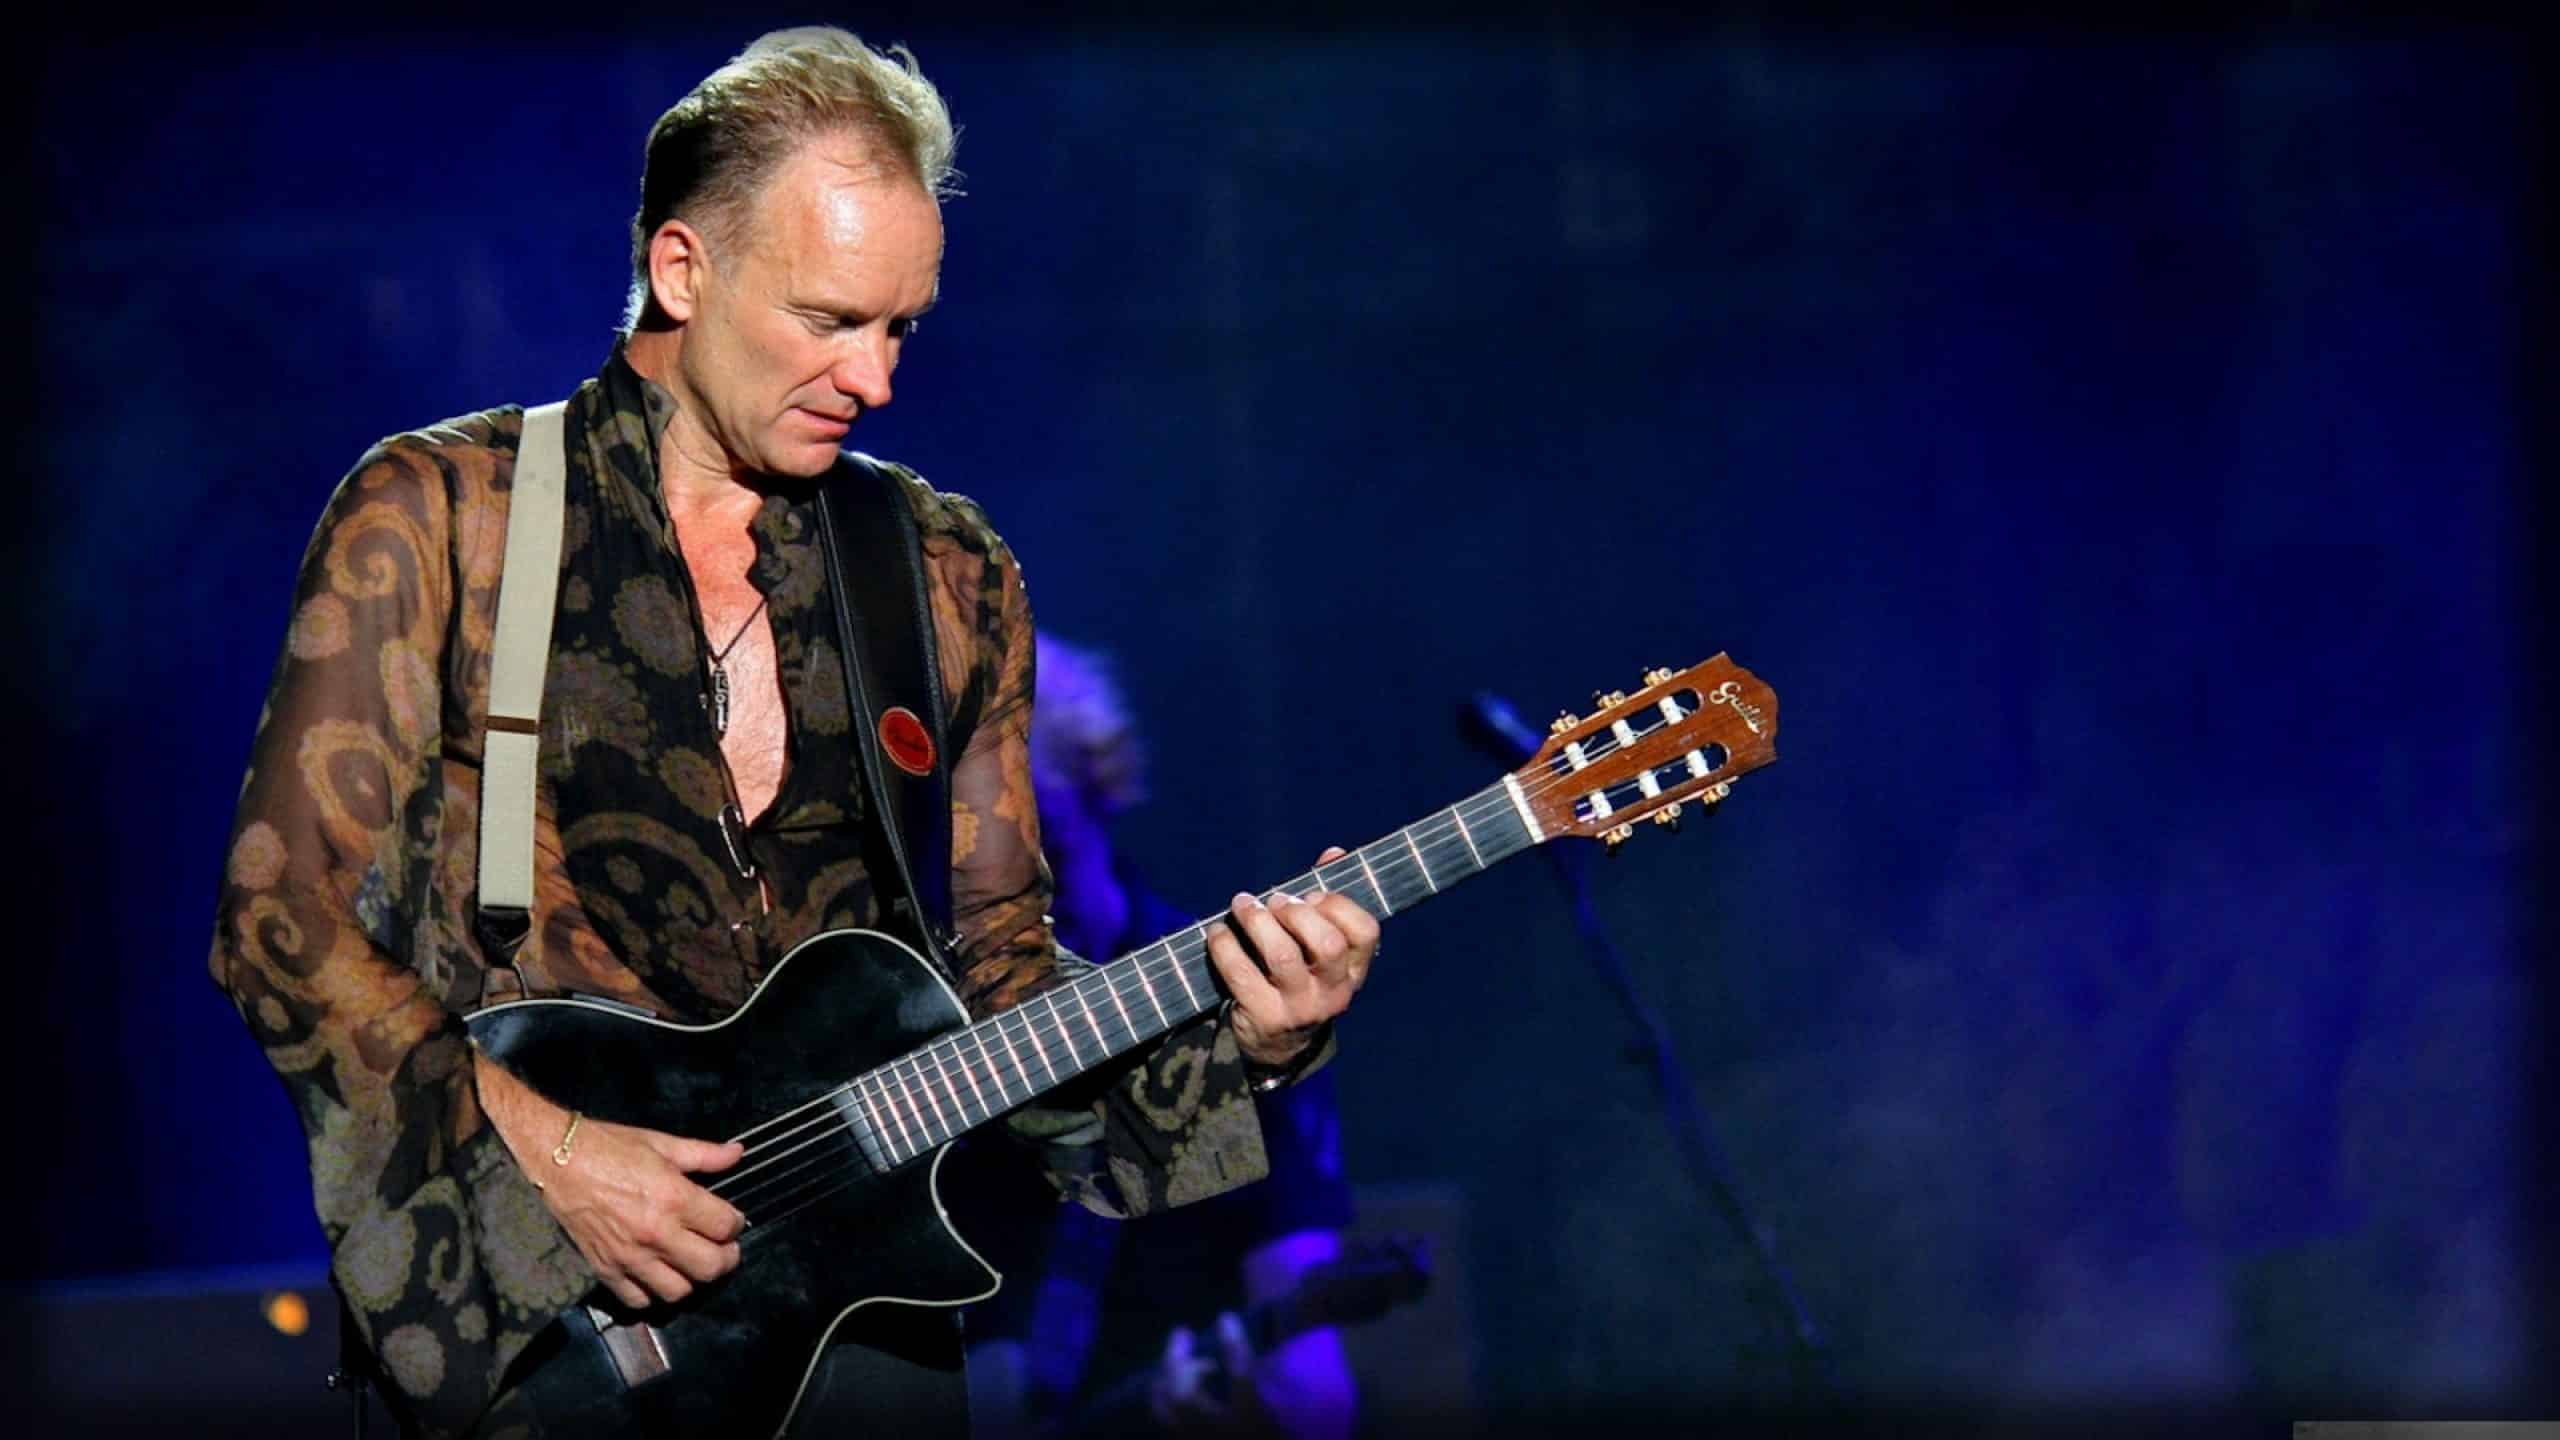 Every Breath You Take': Behind Sting And The Police's Signature Song